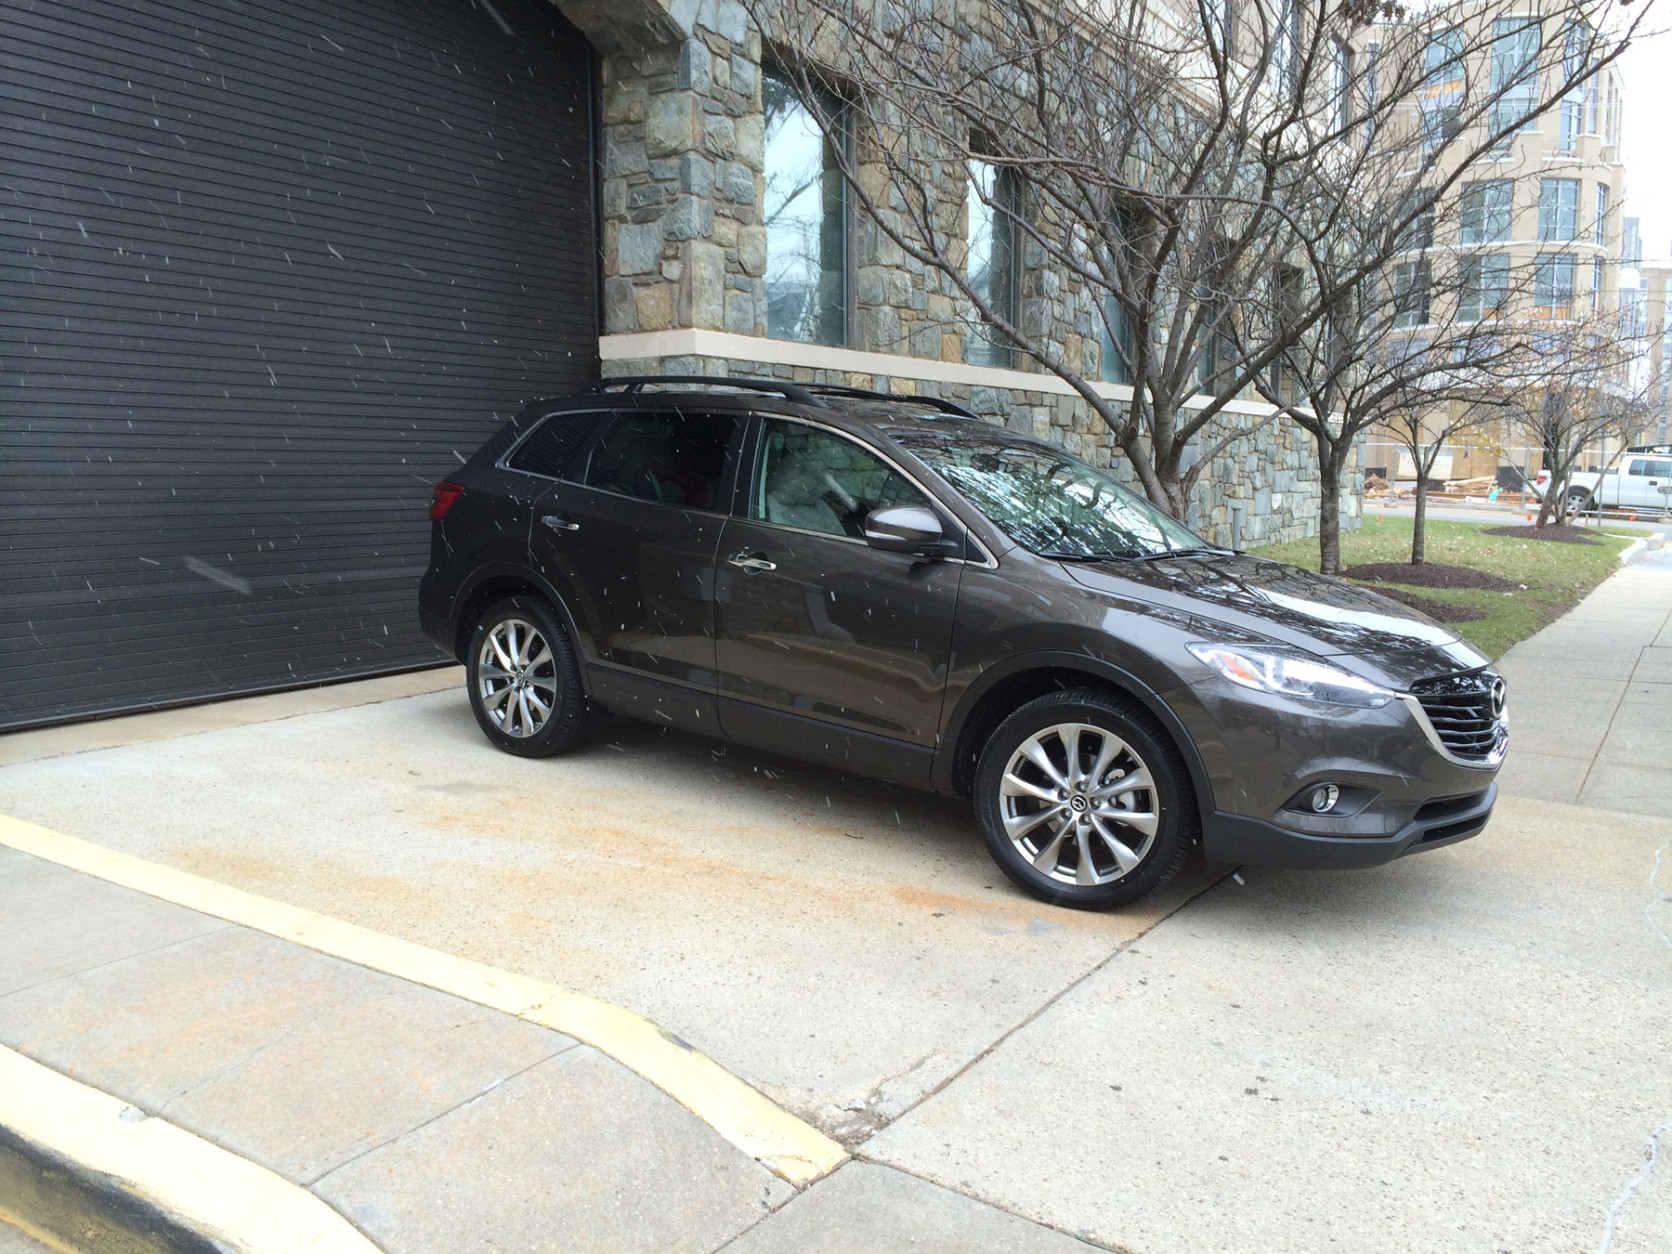 The Mazda CX-9 behaves like one of Mazda’s sporty sedans but the CX-9 has seven seats and is a pretty large SUV. (WTOP/Mike Parris)